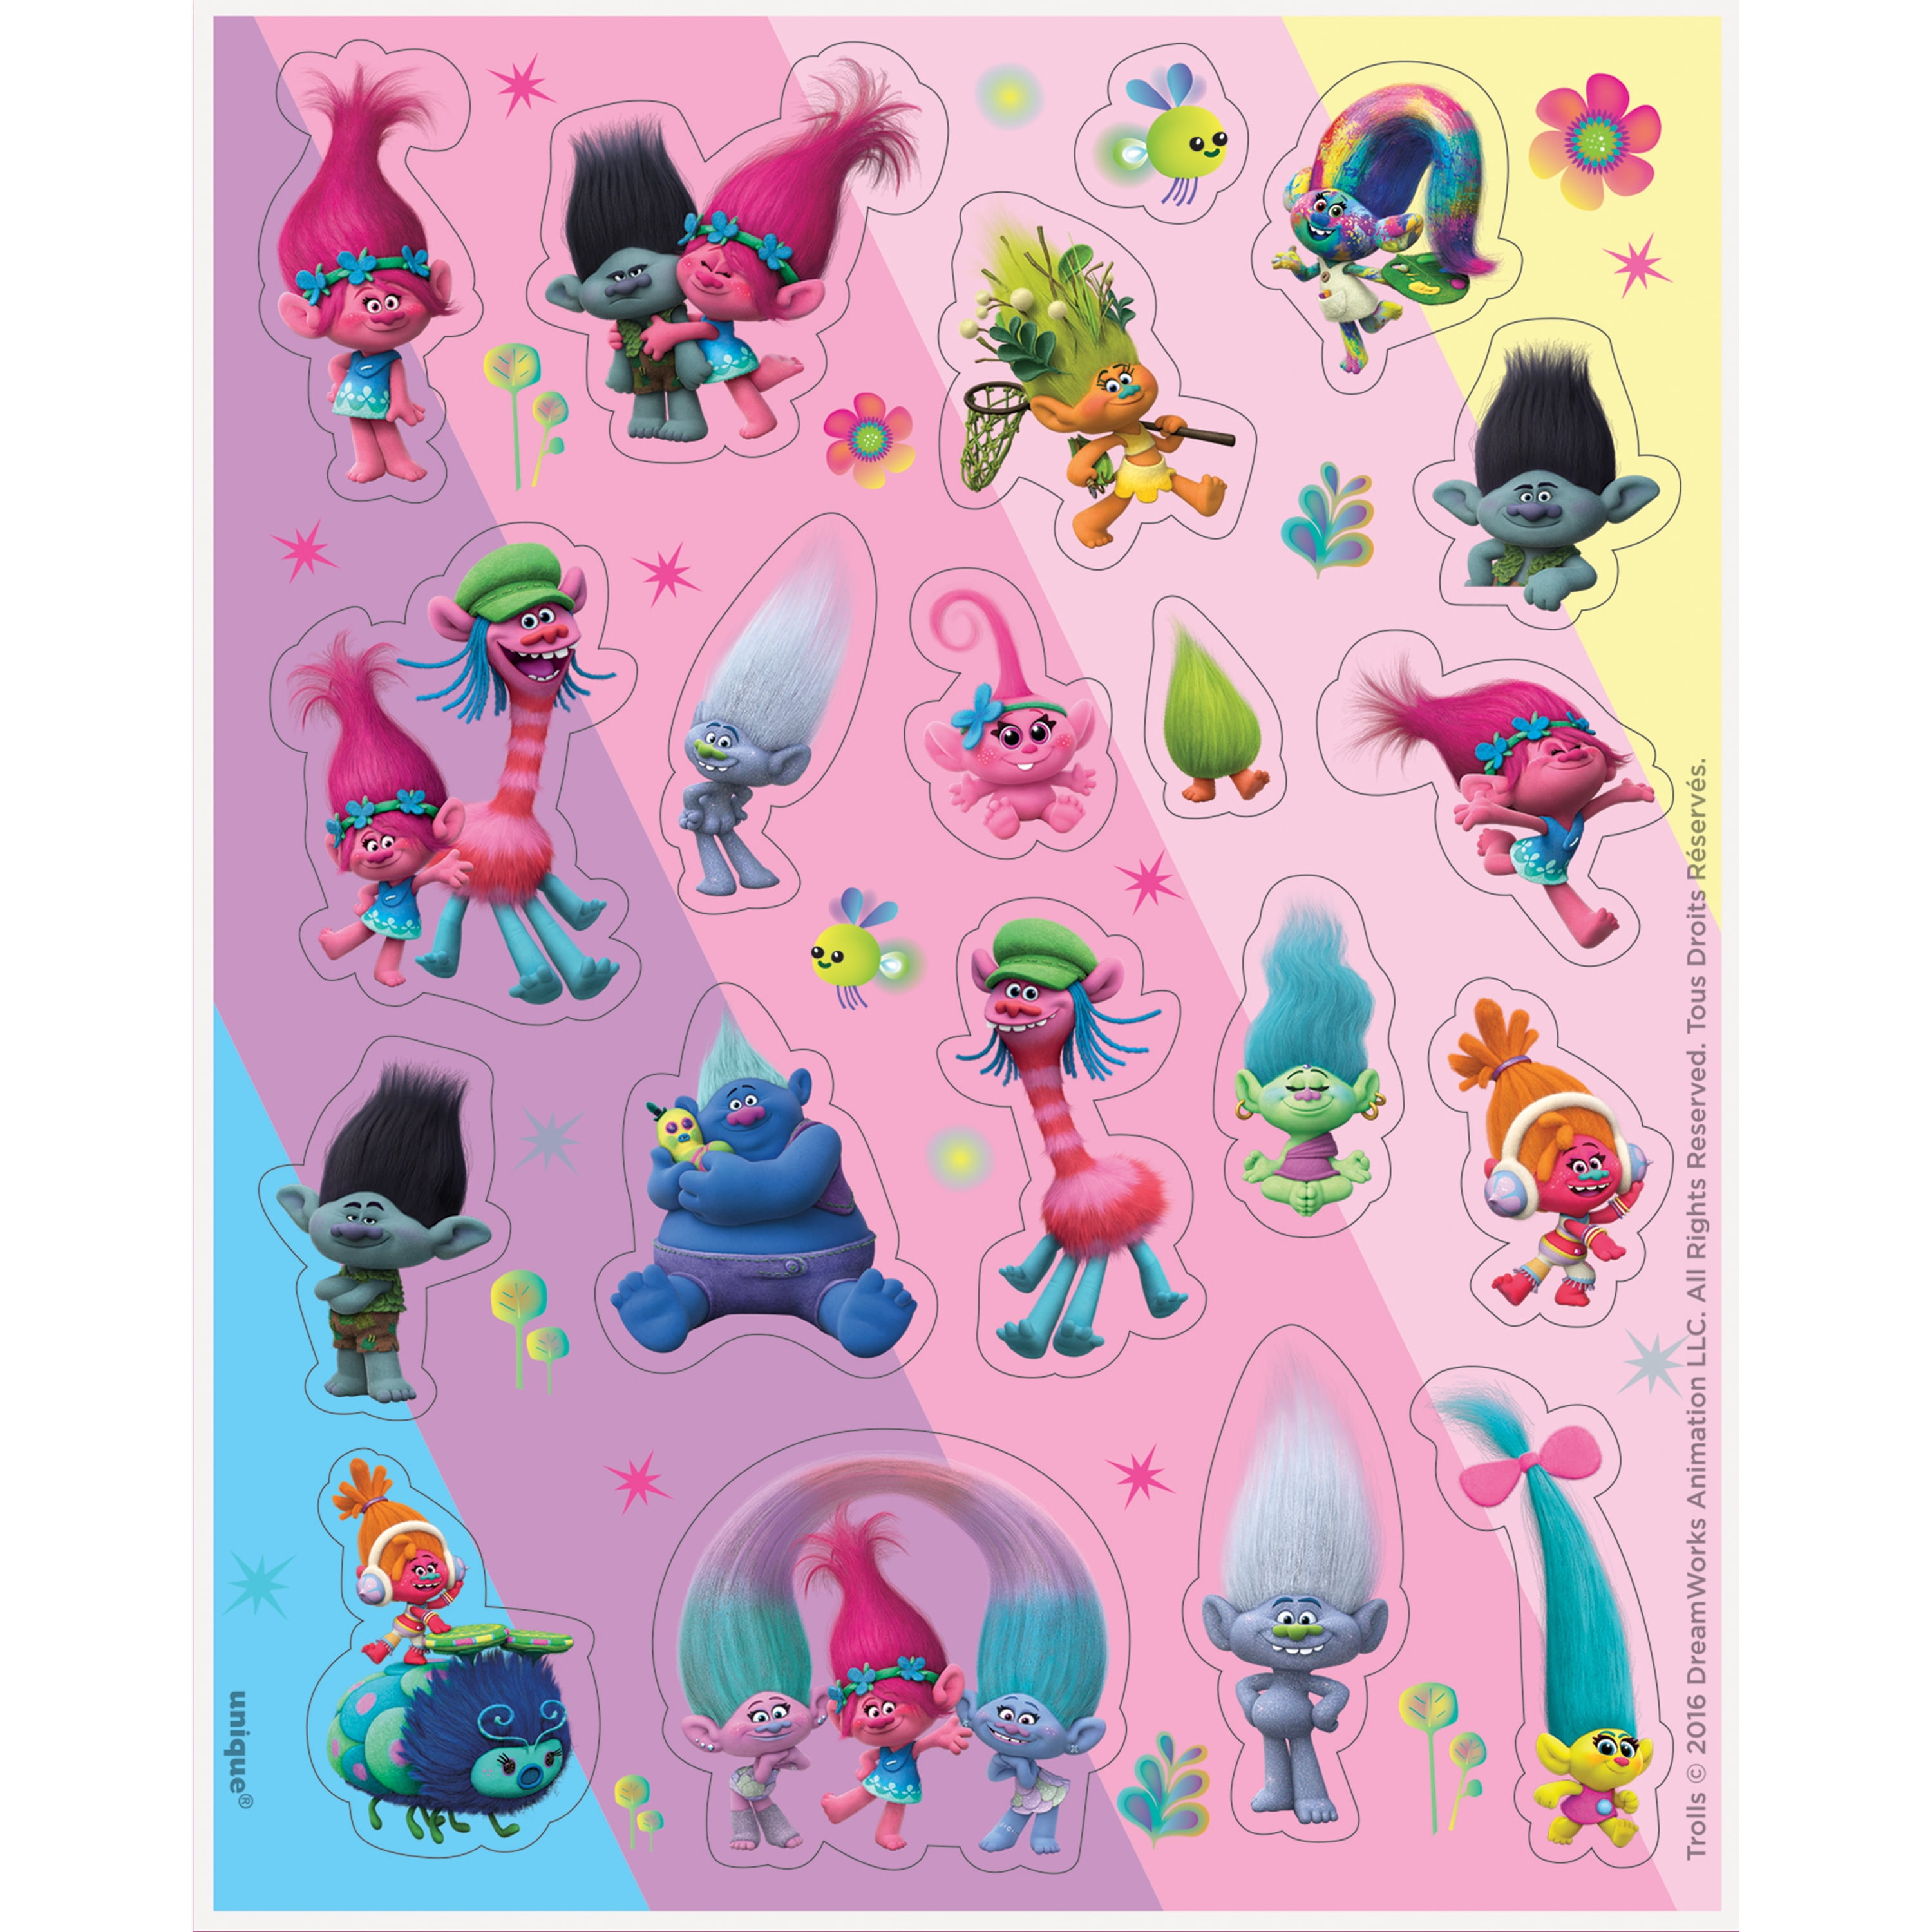 Stickers Childrens Home Activities Fabric stickers Dreamworks Trolls Erasers 